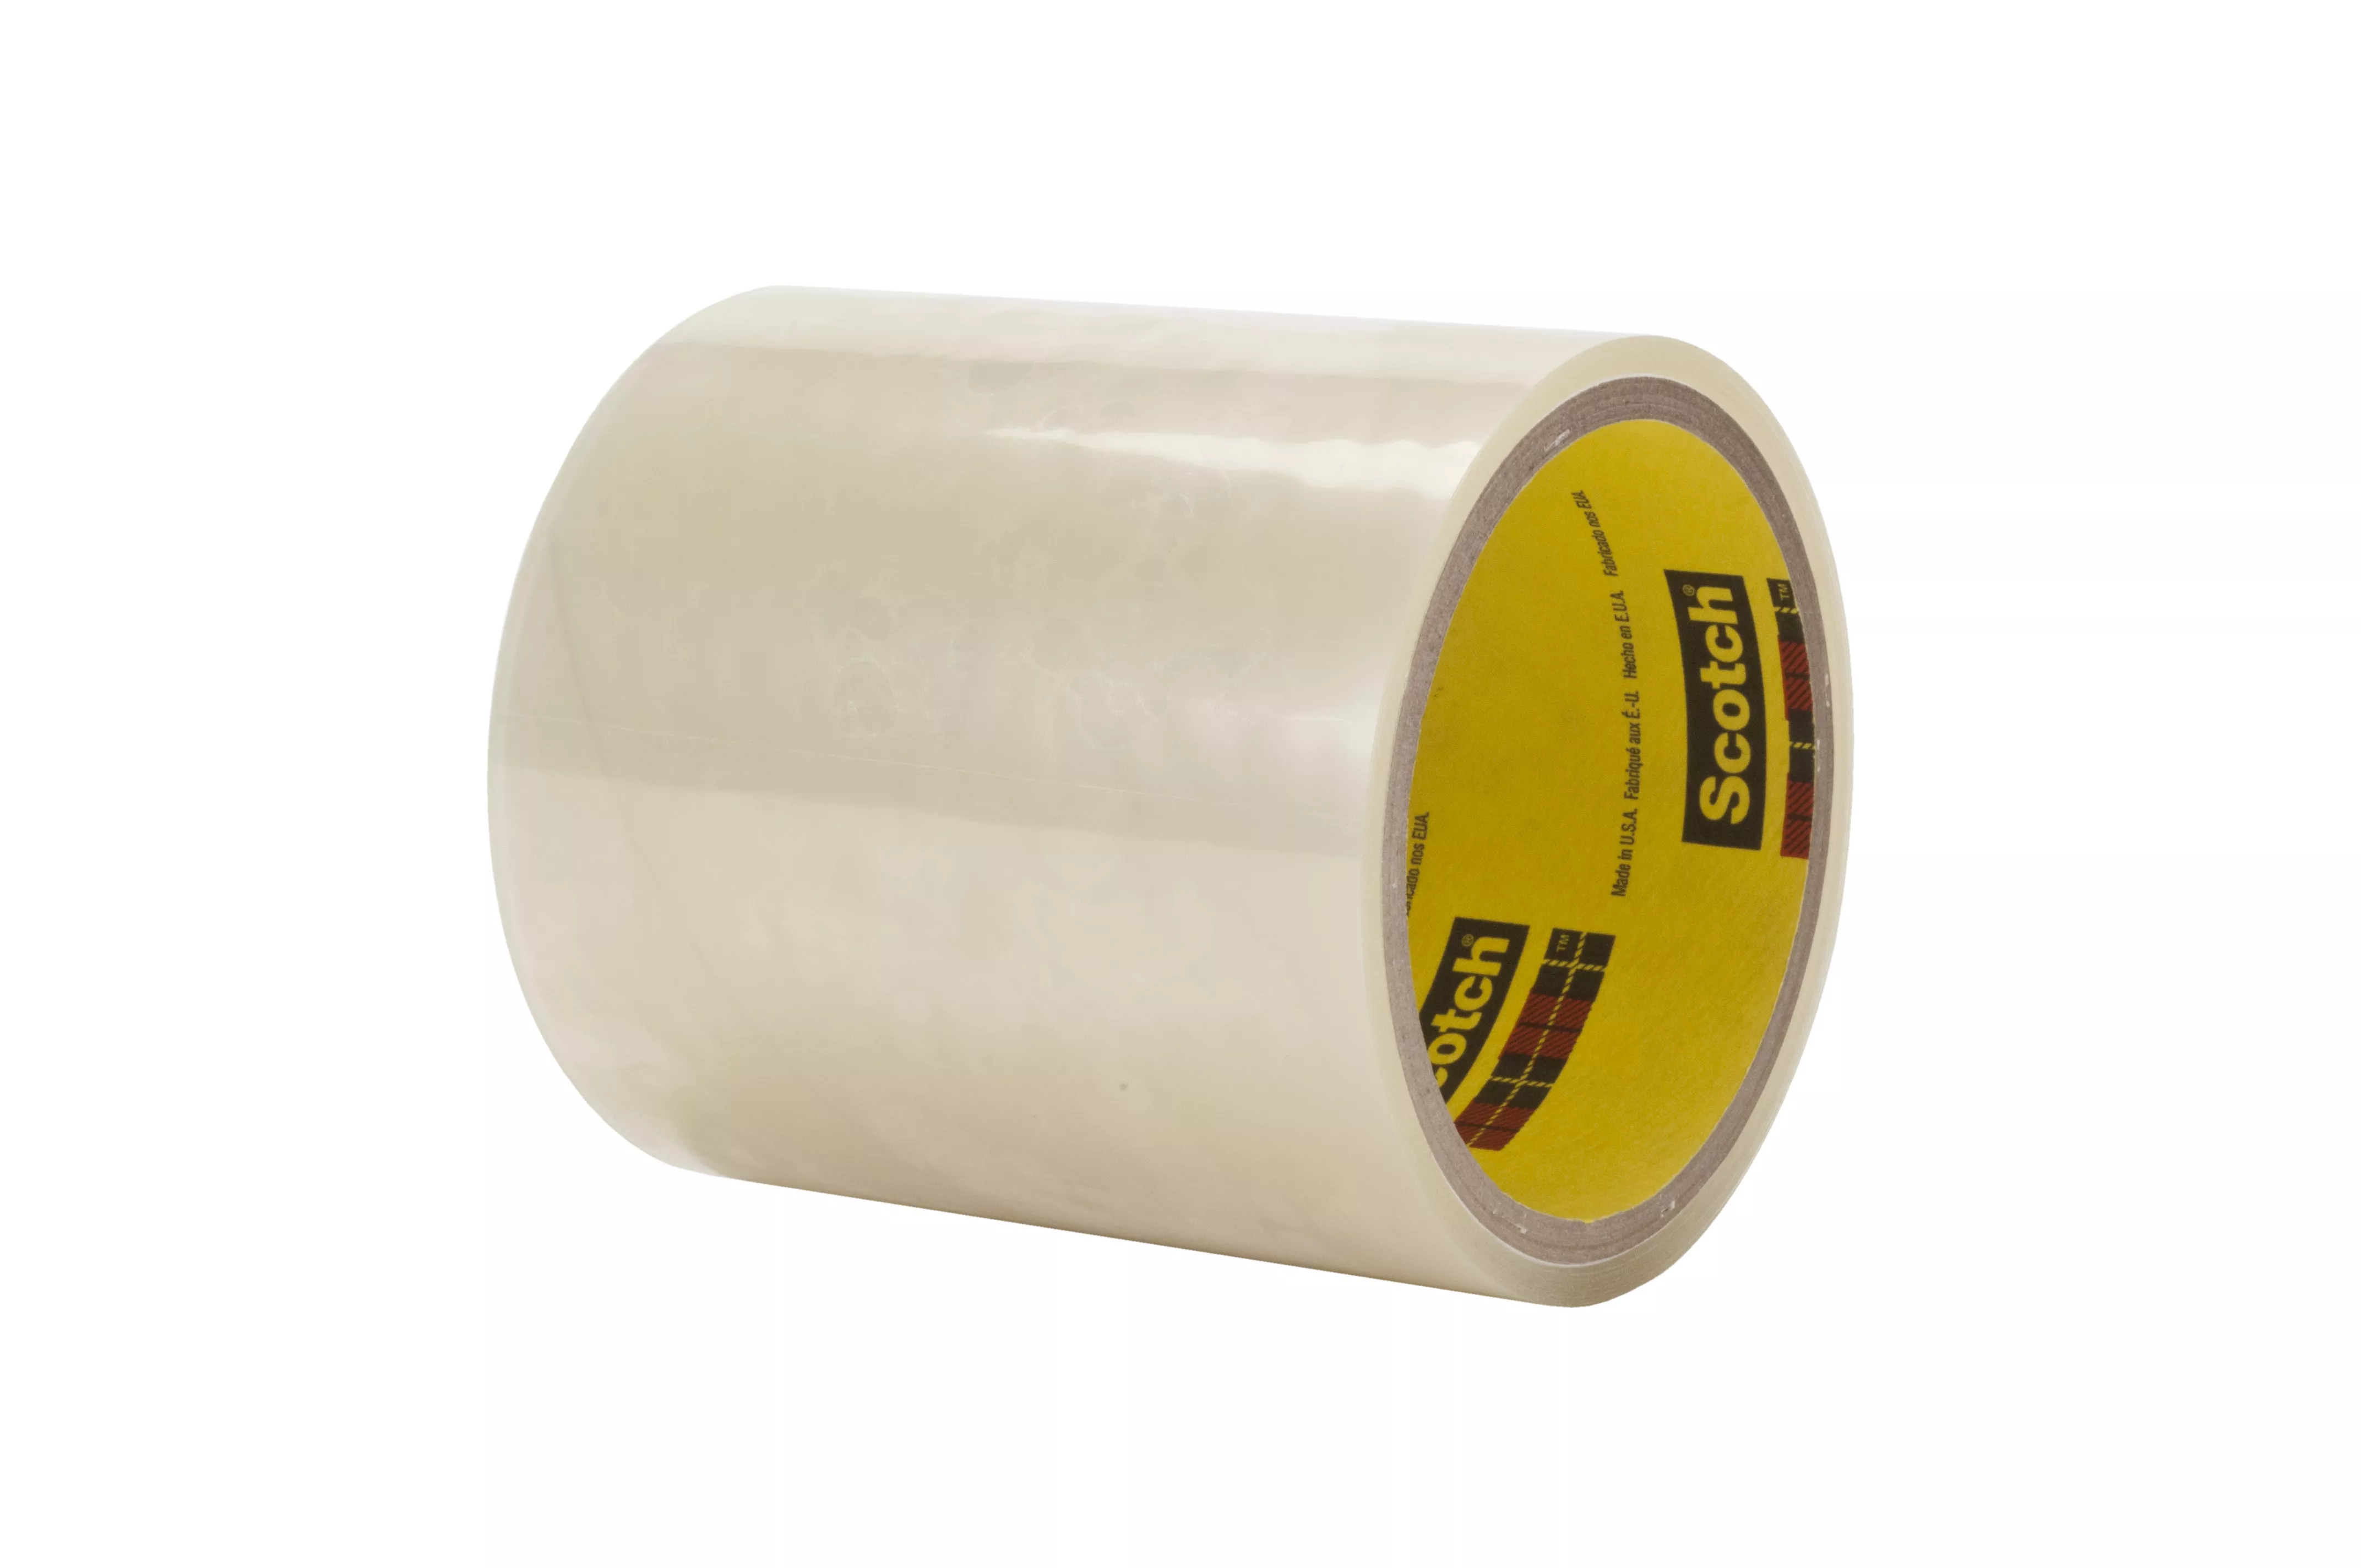 3M™ Adhesive Transfer Tape 467MP, Clear, 48 in x 180 yd, 2 mil, 1
Roll/Case